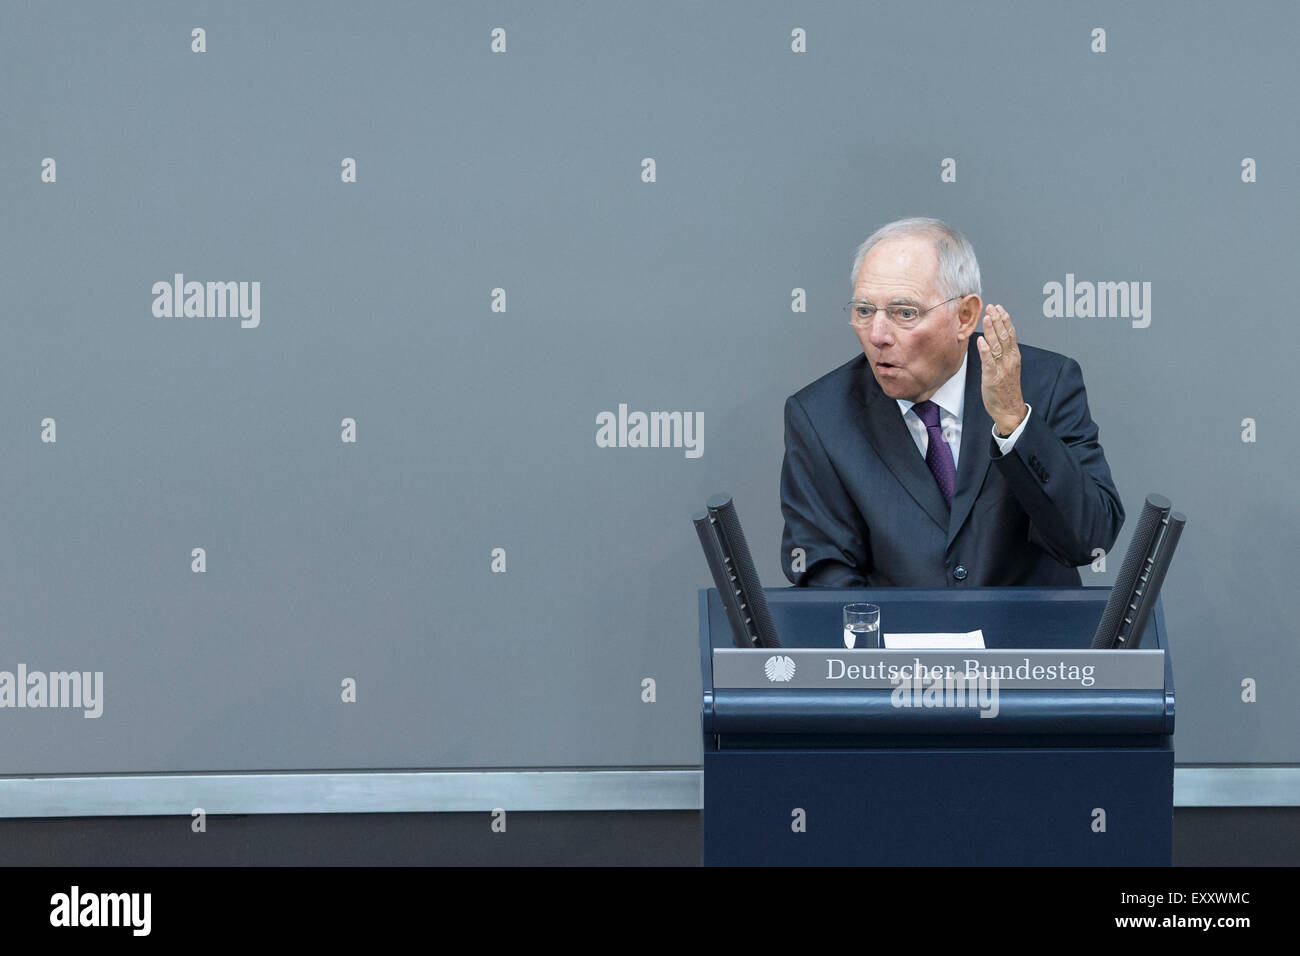 Berlin, Germany. 17th July, 2015. Special session of the German Parliament - consultation of government on the ' negotiations of the Government Federal relative to the concession of financial support for the Hellenic Republic of Greece ' realized at the German Parliament on 17.07.2015 in Berlin, Germany. / Picture: Wolfgang Schäuble (CDU), German Minister of Finance, during his speech at the session of the german Parliament relative to the concession of financial support for the Hellenic Republic of Greece. Credit:  Reynaldo Chaib Paganelli/Alamy Live News Stock Photo